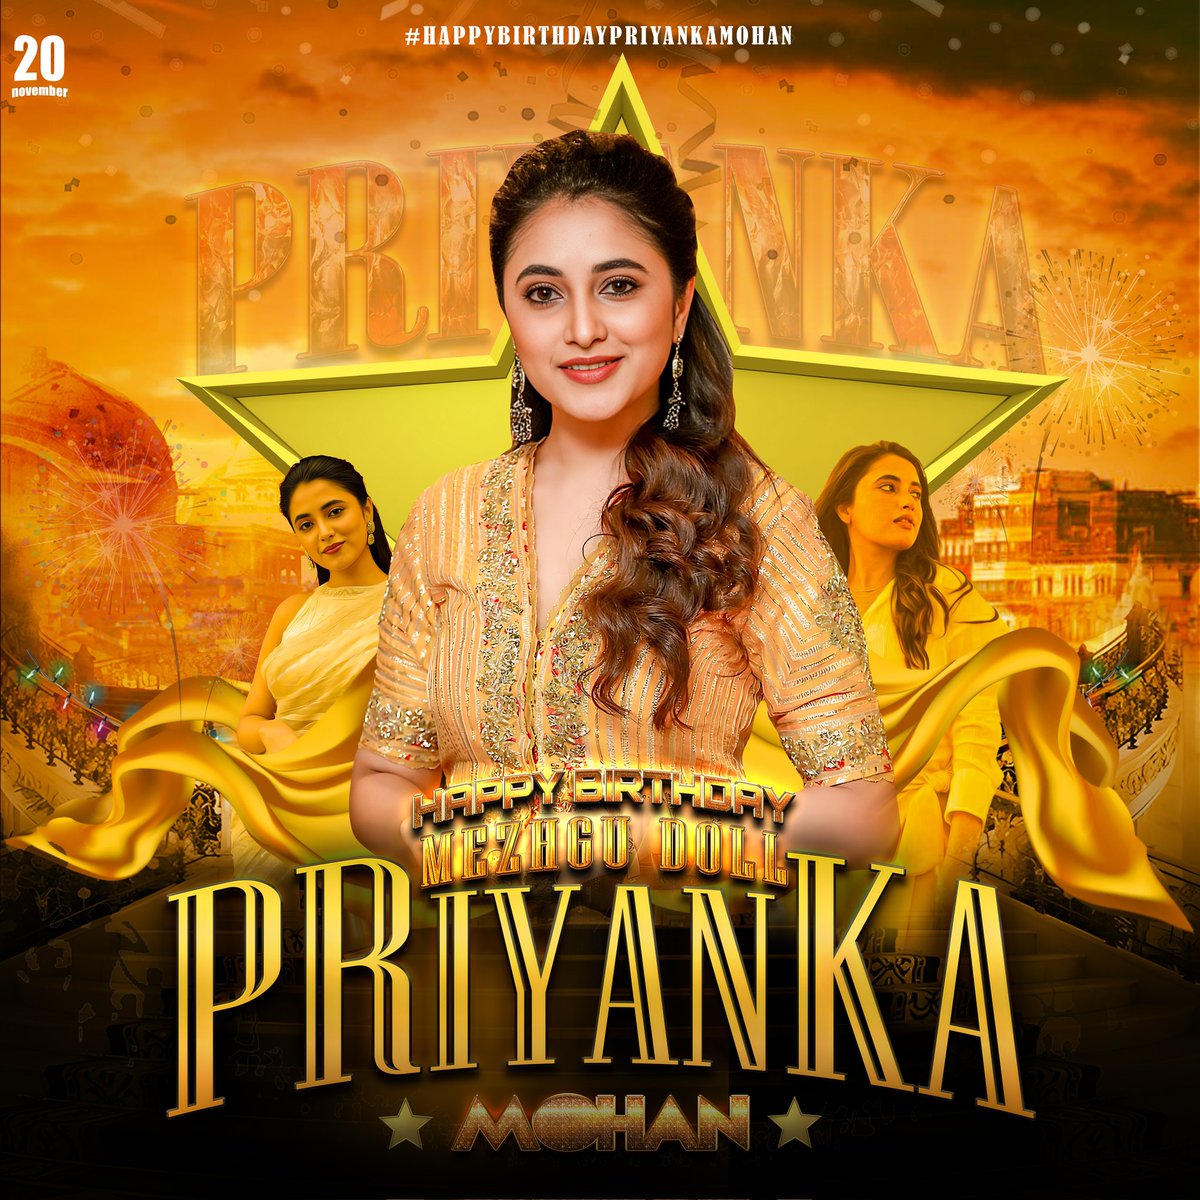 Happy Birthday Queen .@priyankaamohan 🤗❤️😍

Wishing you all success for your upcoming projects ma'am!

CDP Design : @Dfan_Surya

#RetouchFactory #PriyankaArulMohan 
#HBDPriyankaMohan #HappyBirthdayPriyankaMohan